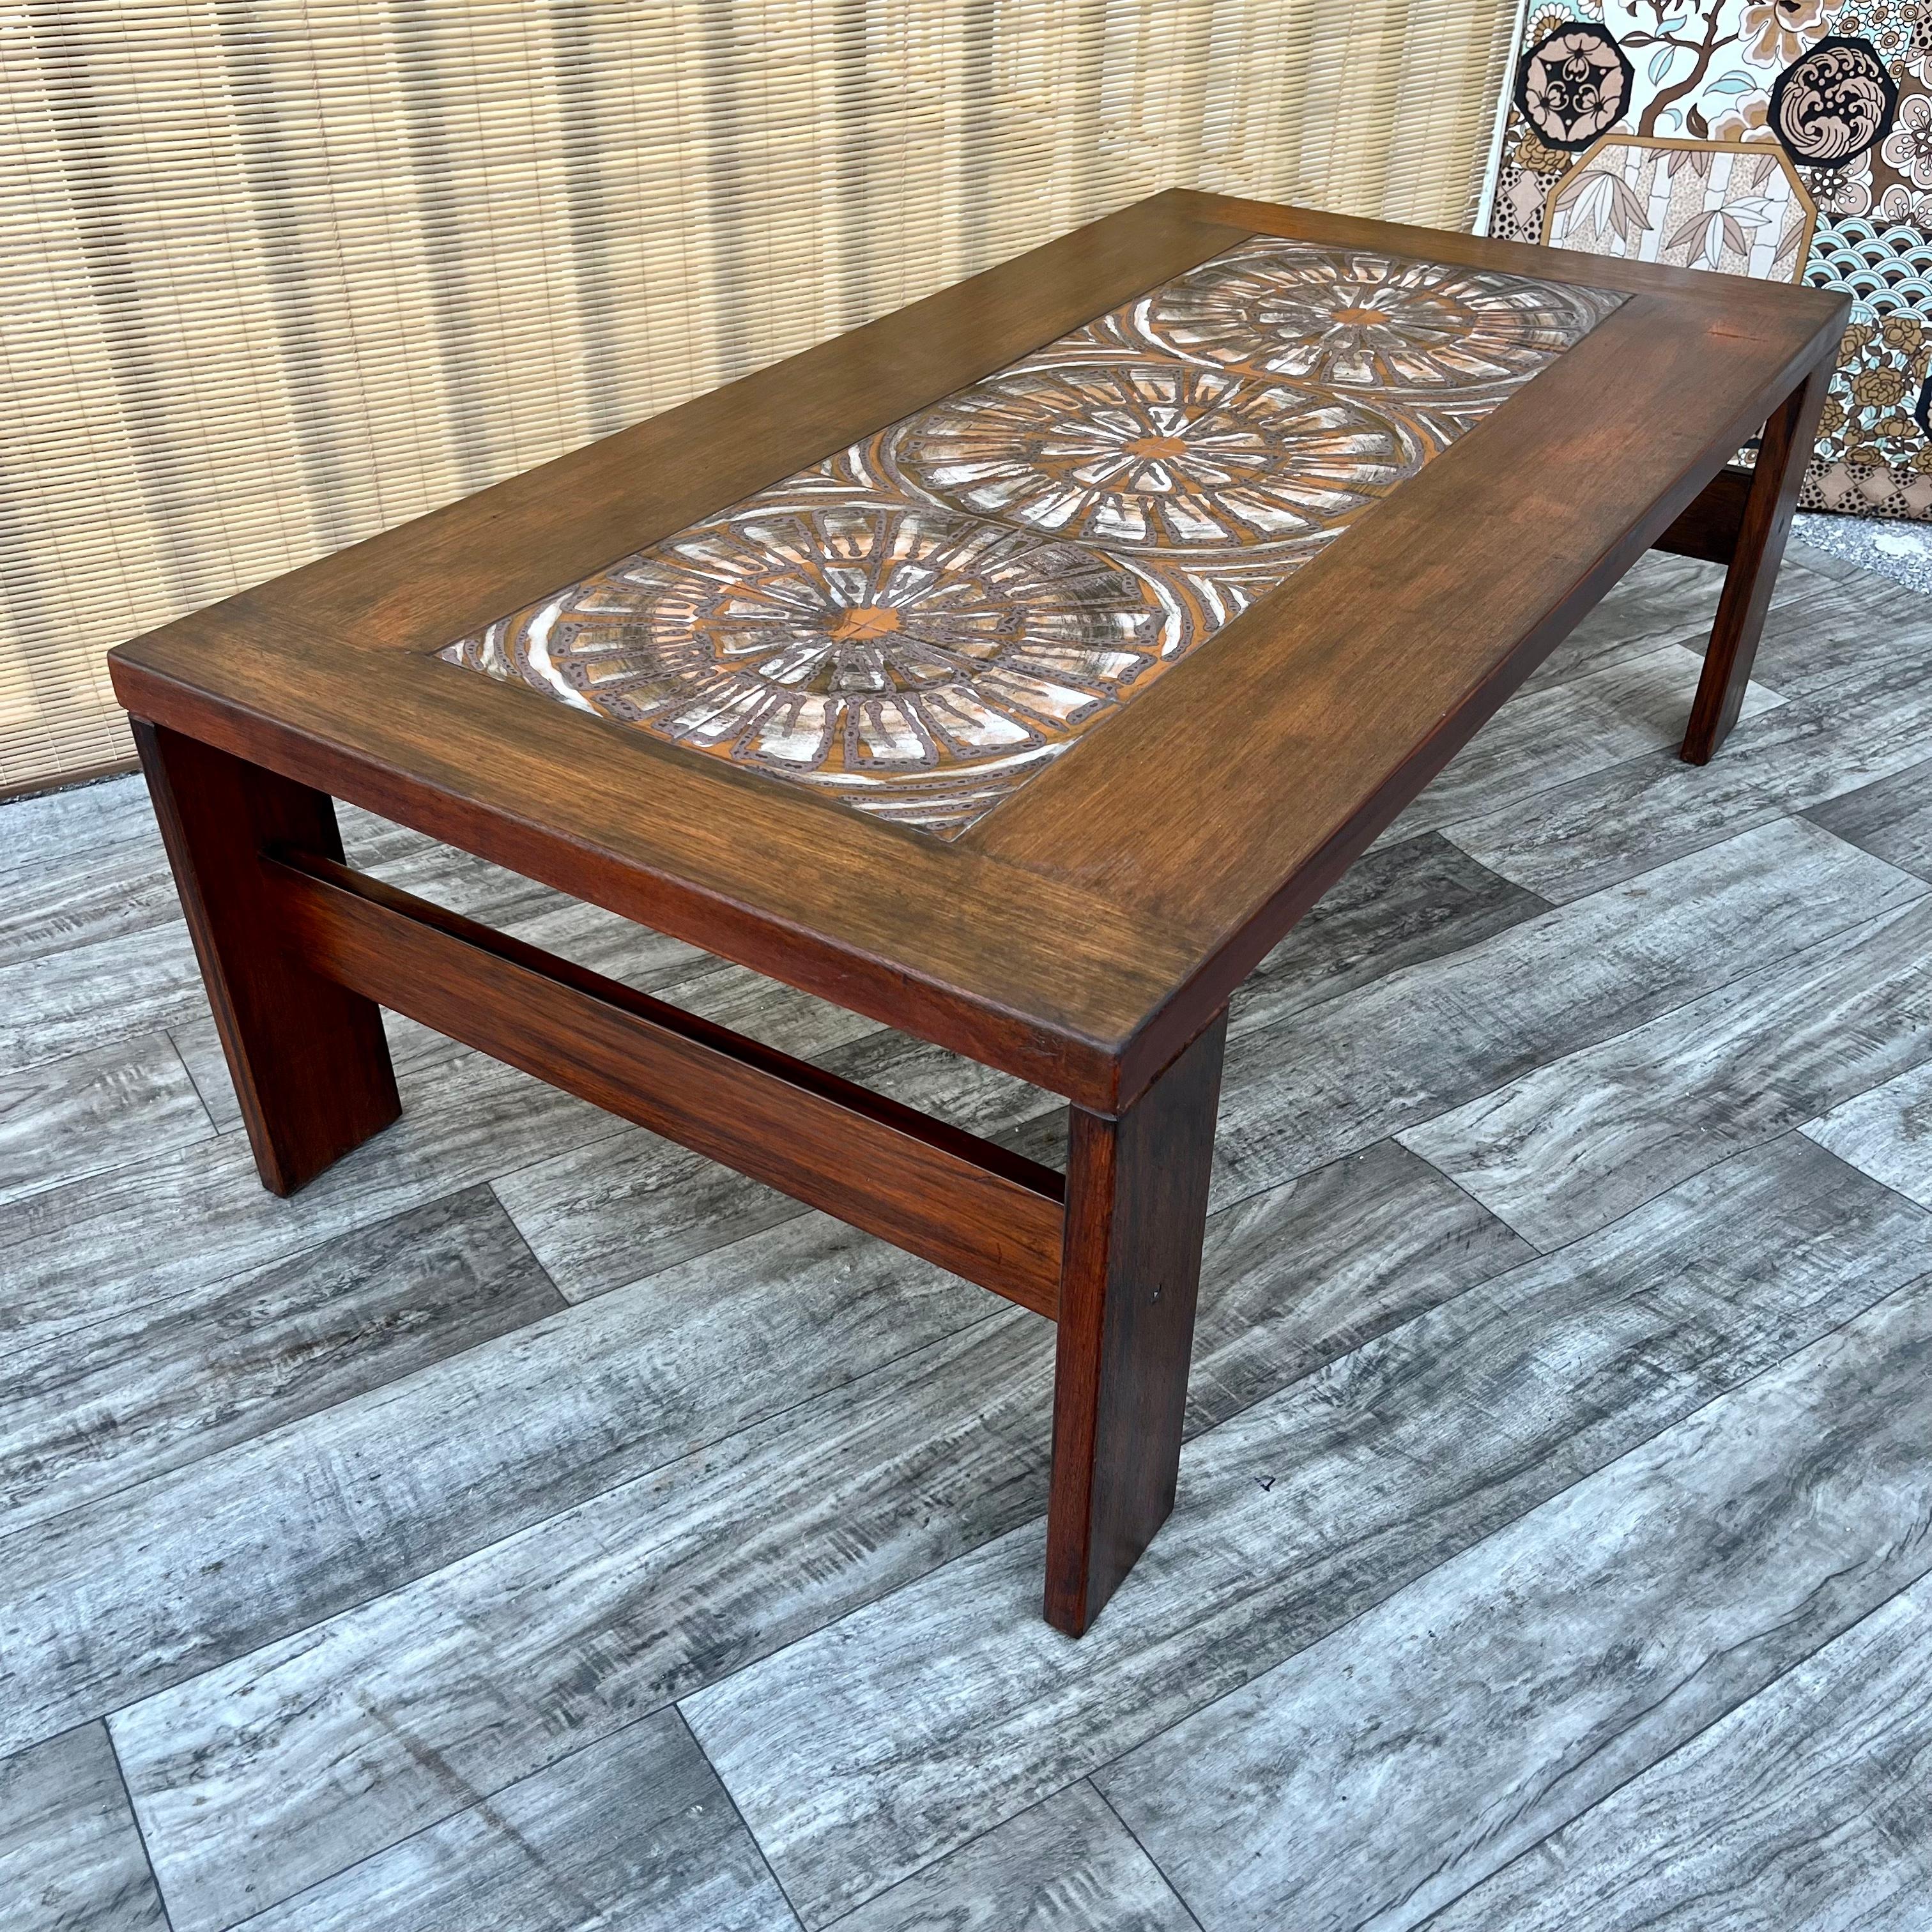 Danish Mid Century Modern Coffee Table With Ceramic Tile Inlays. Circa 1960s  For Sale 3